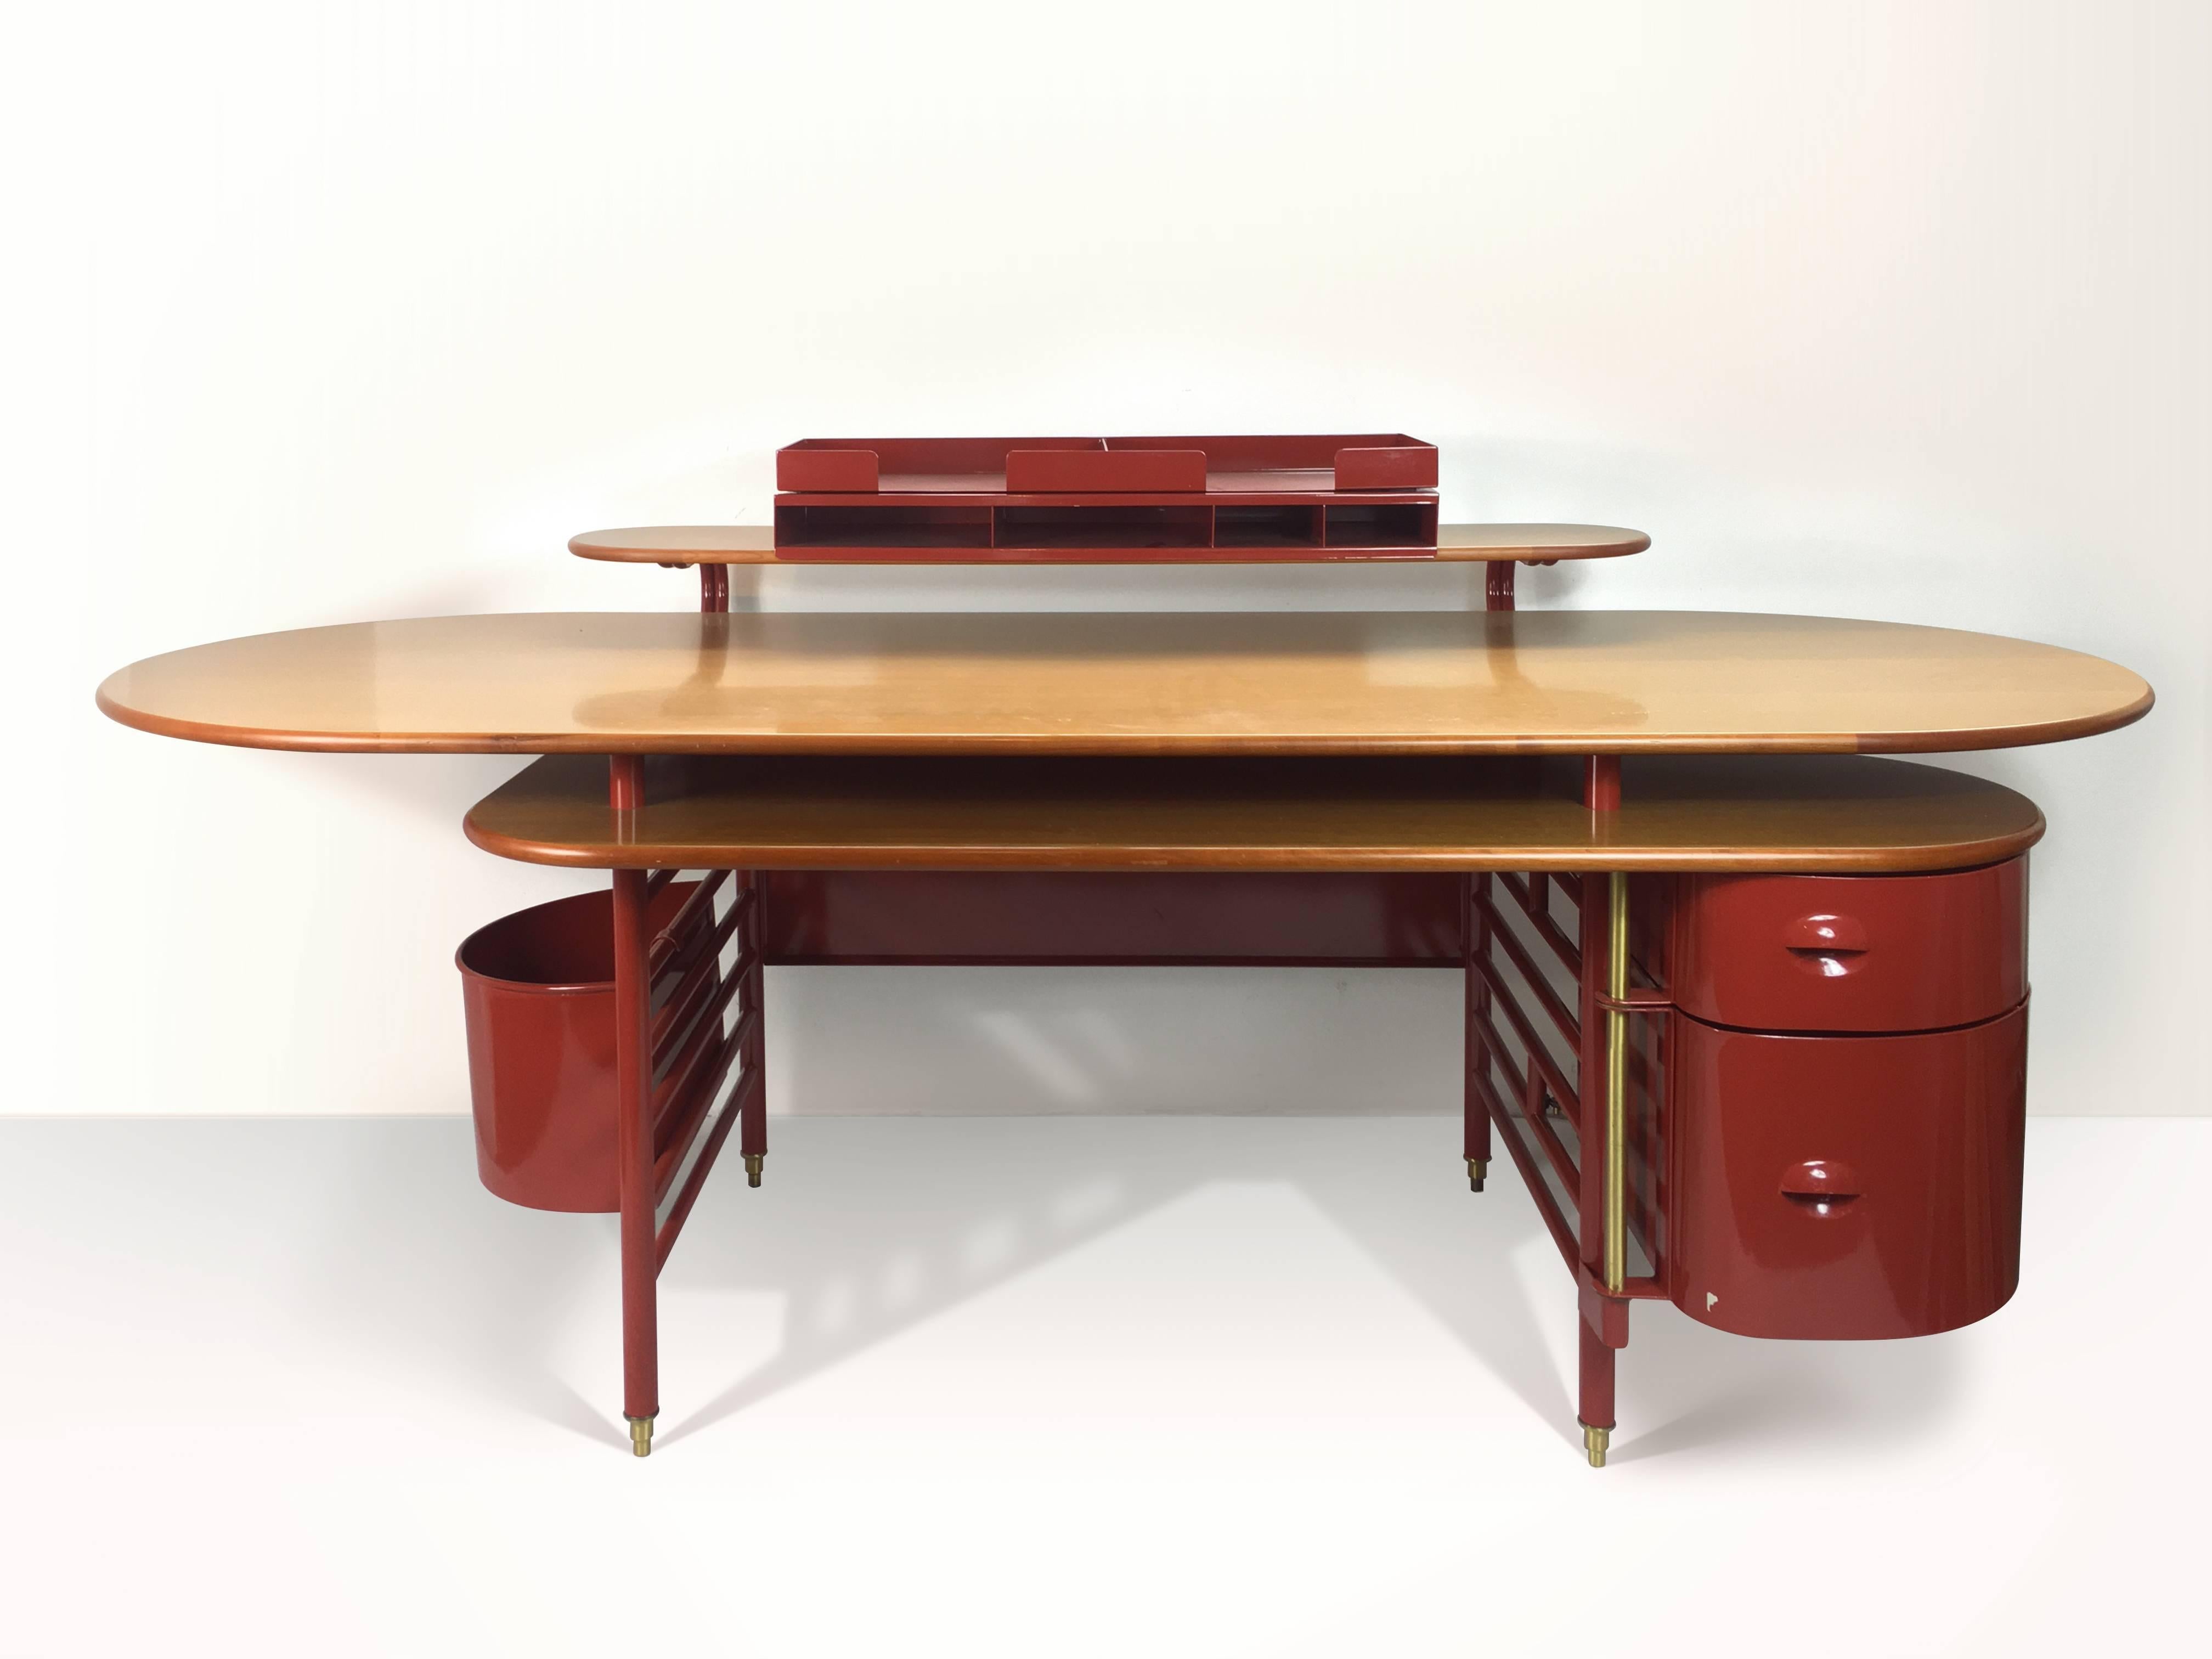 Rare desk and chair, designed by Frank Lloyd Wright in 1936 and produced by Cassina in late 20th century.

Both pieces are signed and stamped, two certificates by Cassina are included. 

Desk is made of cherry wood tops and steel frame, it